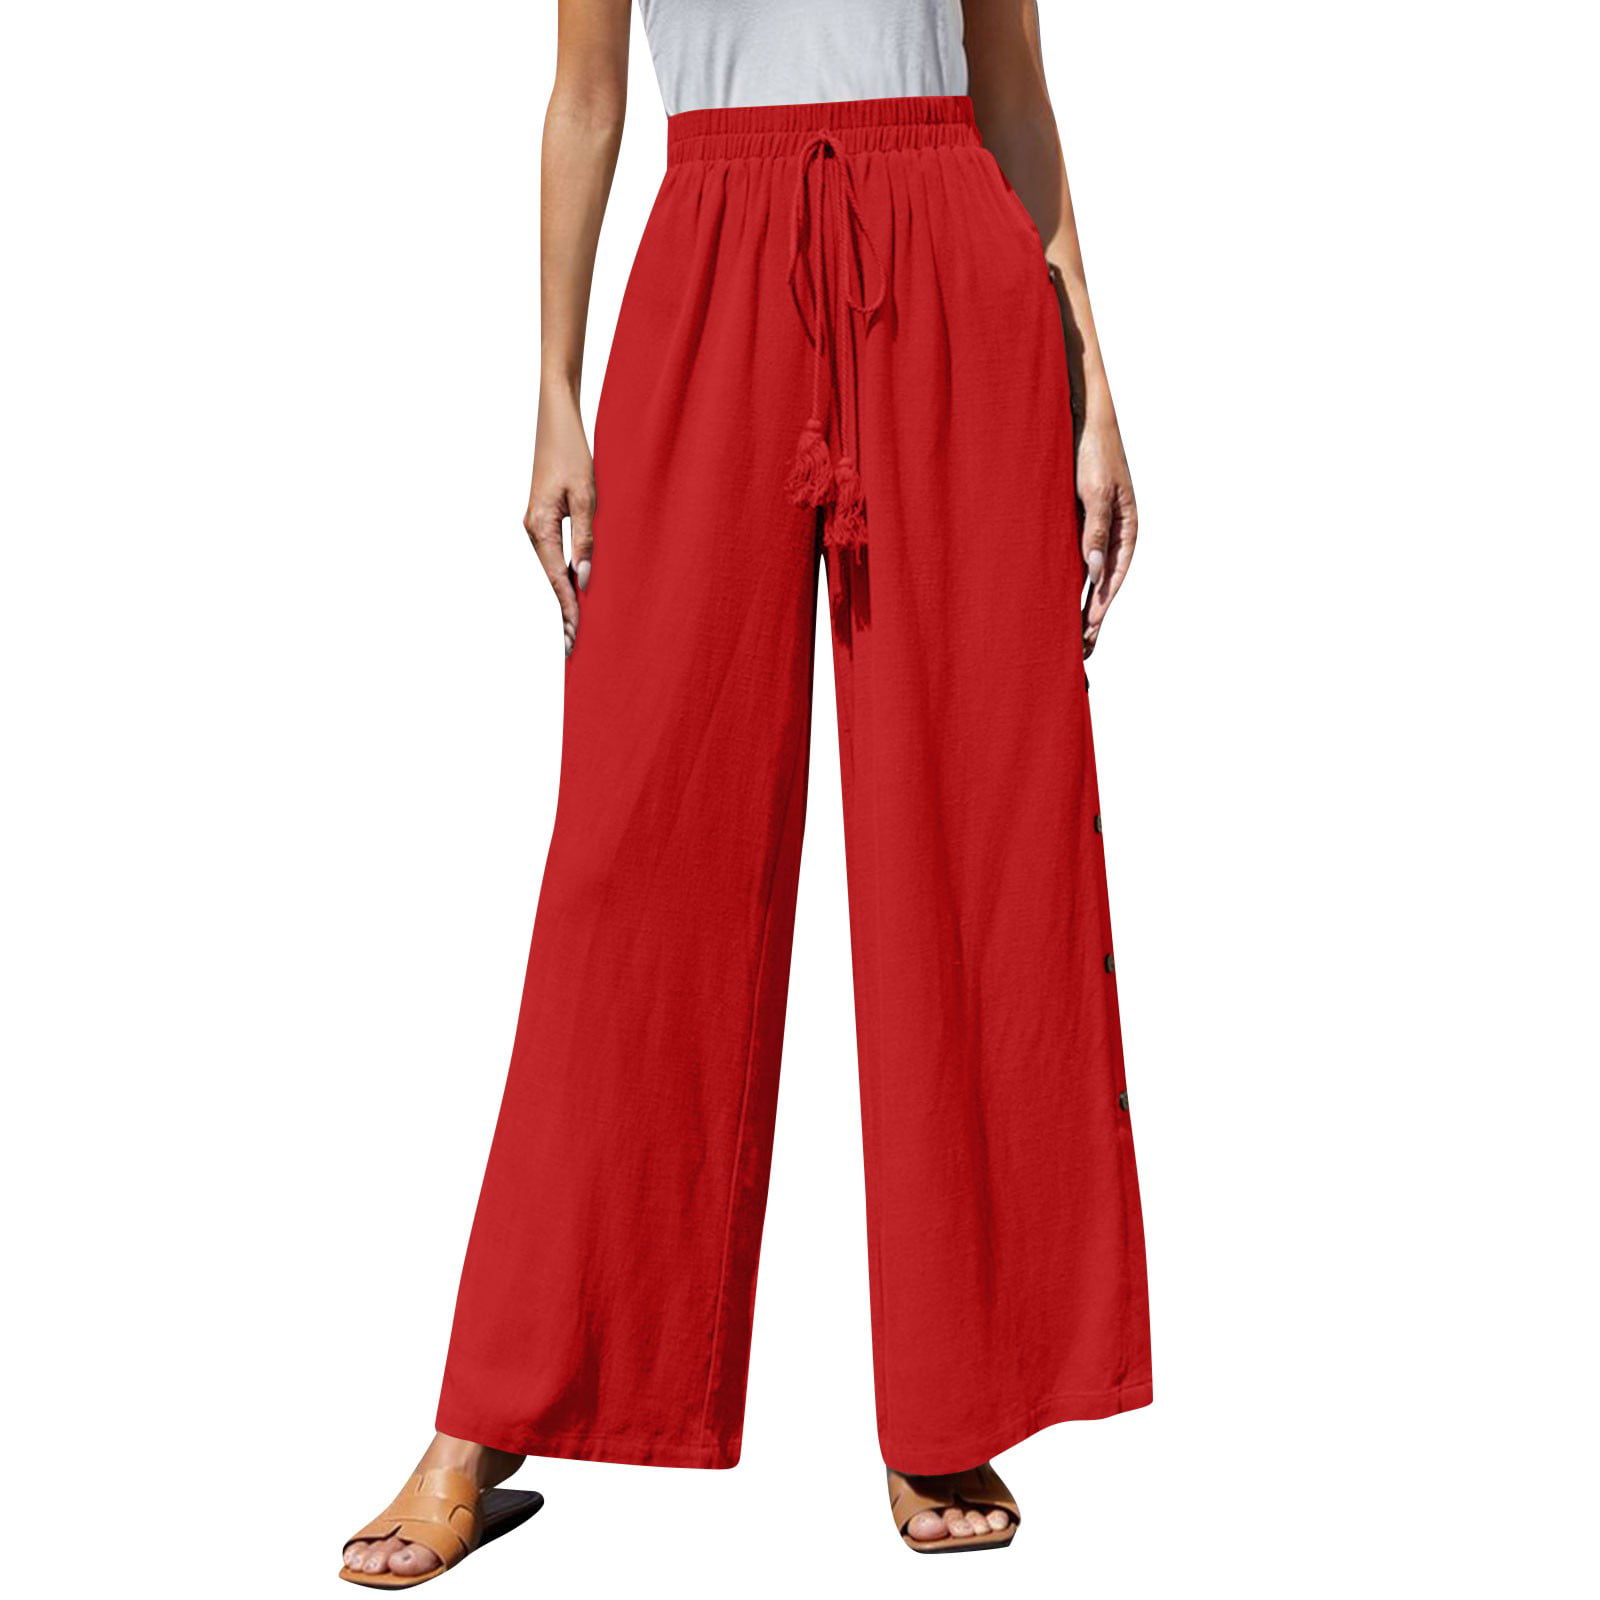 Aamayra Fashion House Red Woolen Pant For Women - Buy Aamayra Fashion House  Red Woolen Pant For Women at Best Price in SYBazzar